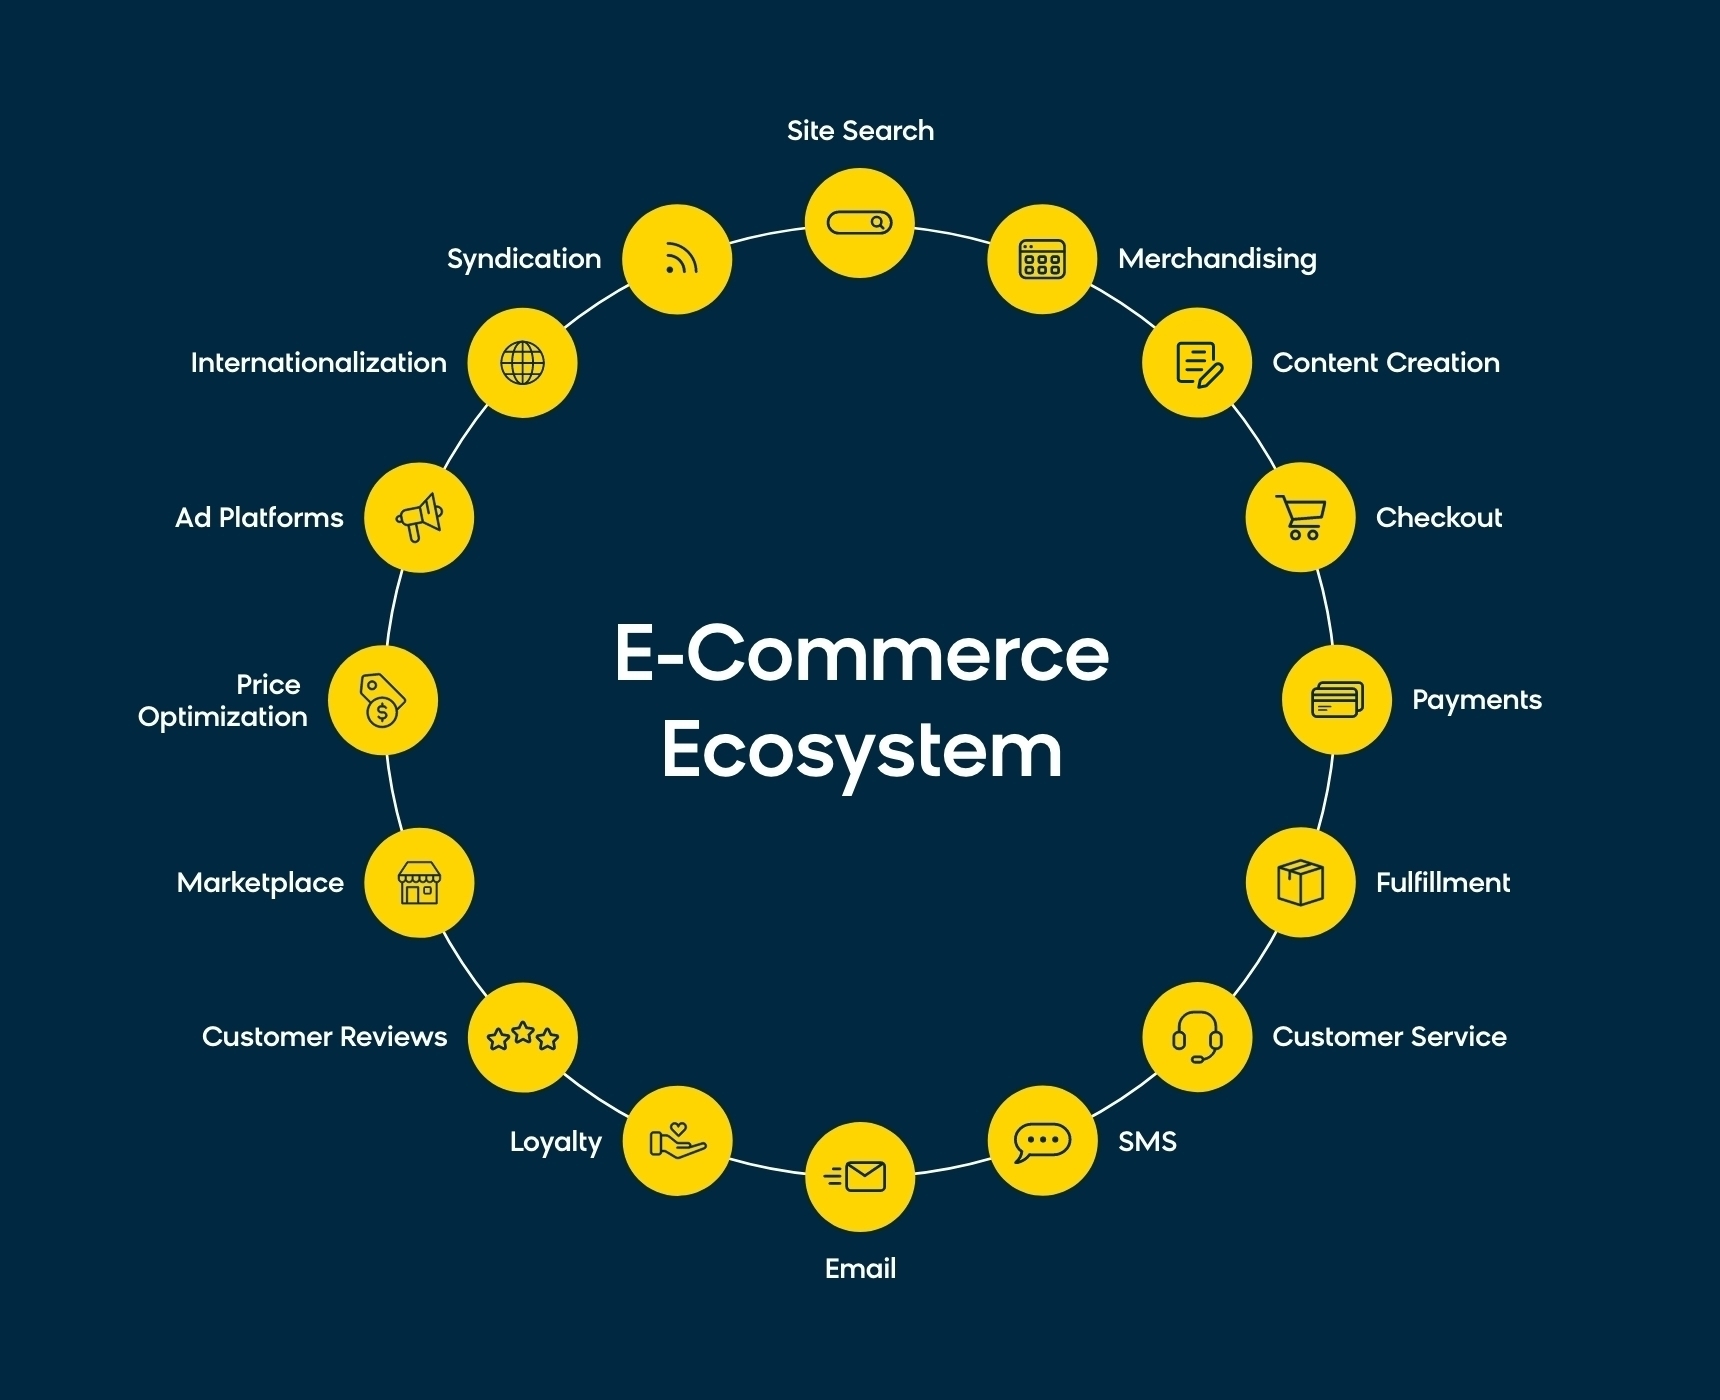 An overview of the e-commerce ecosystem